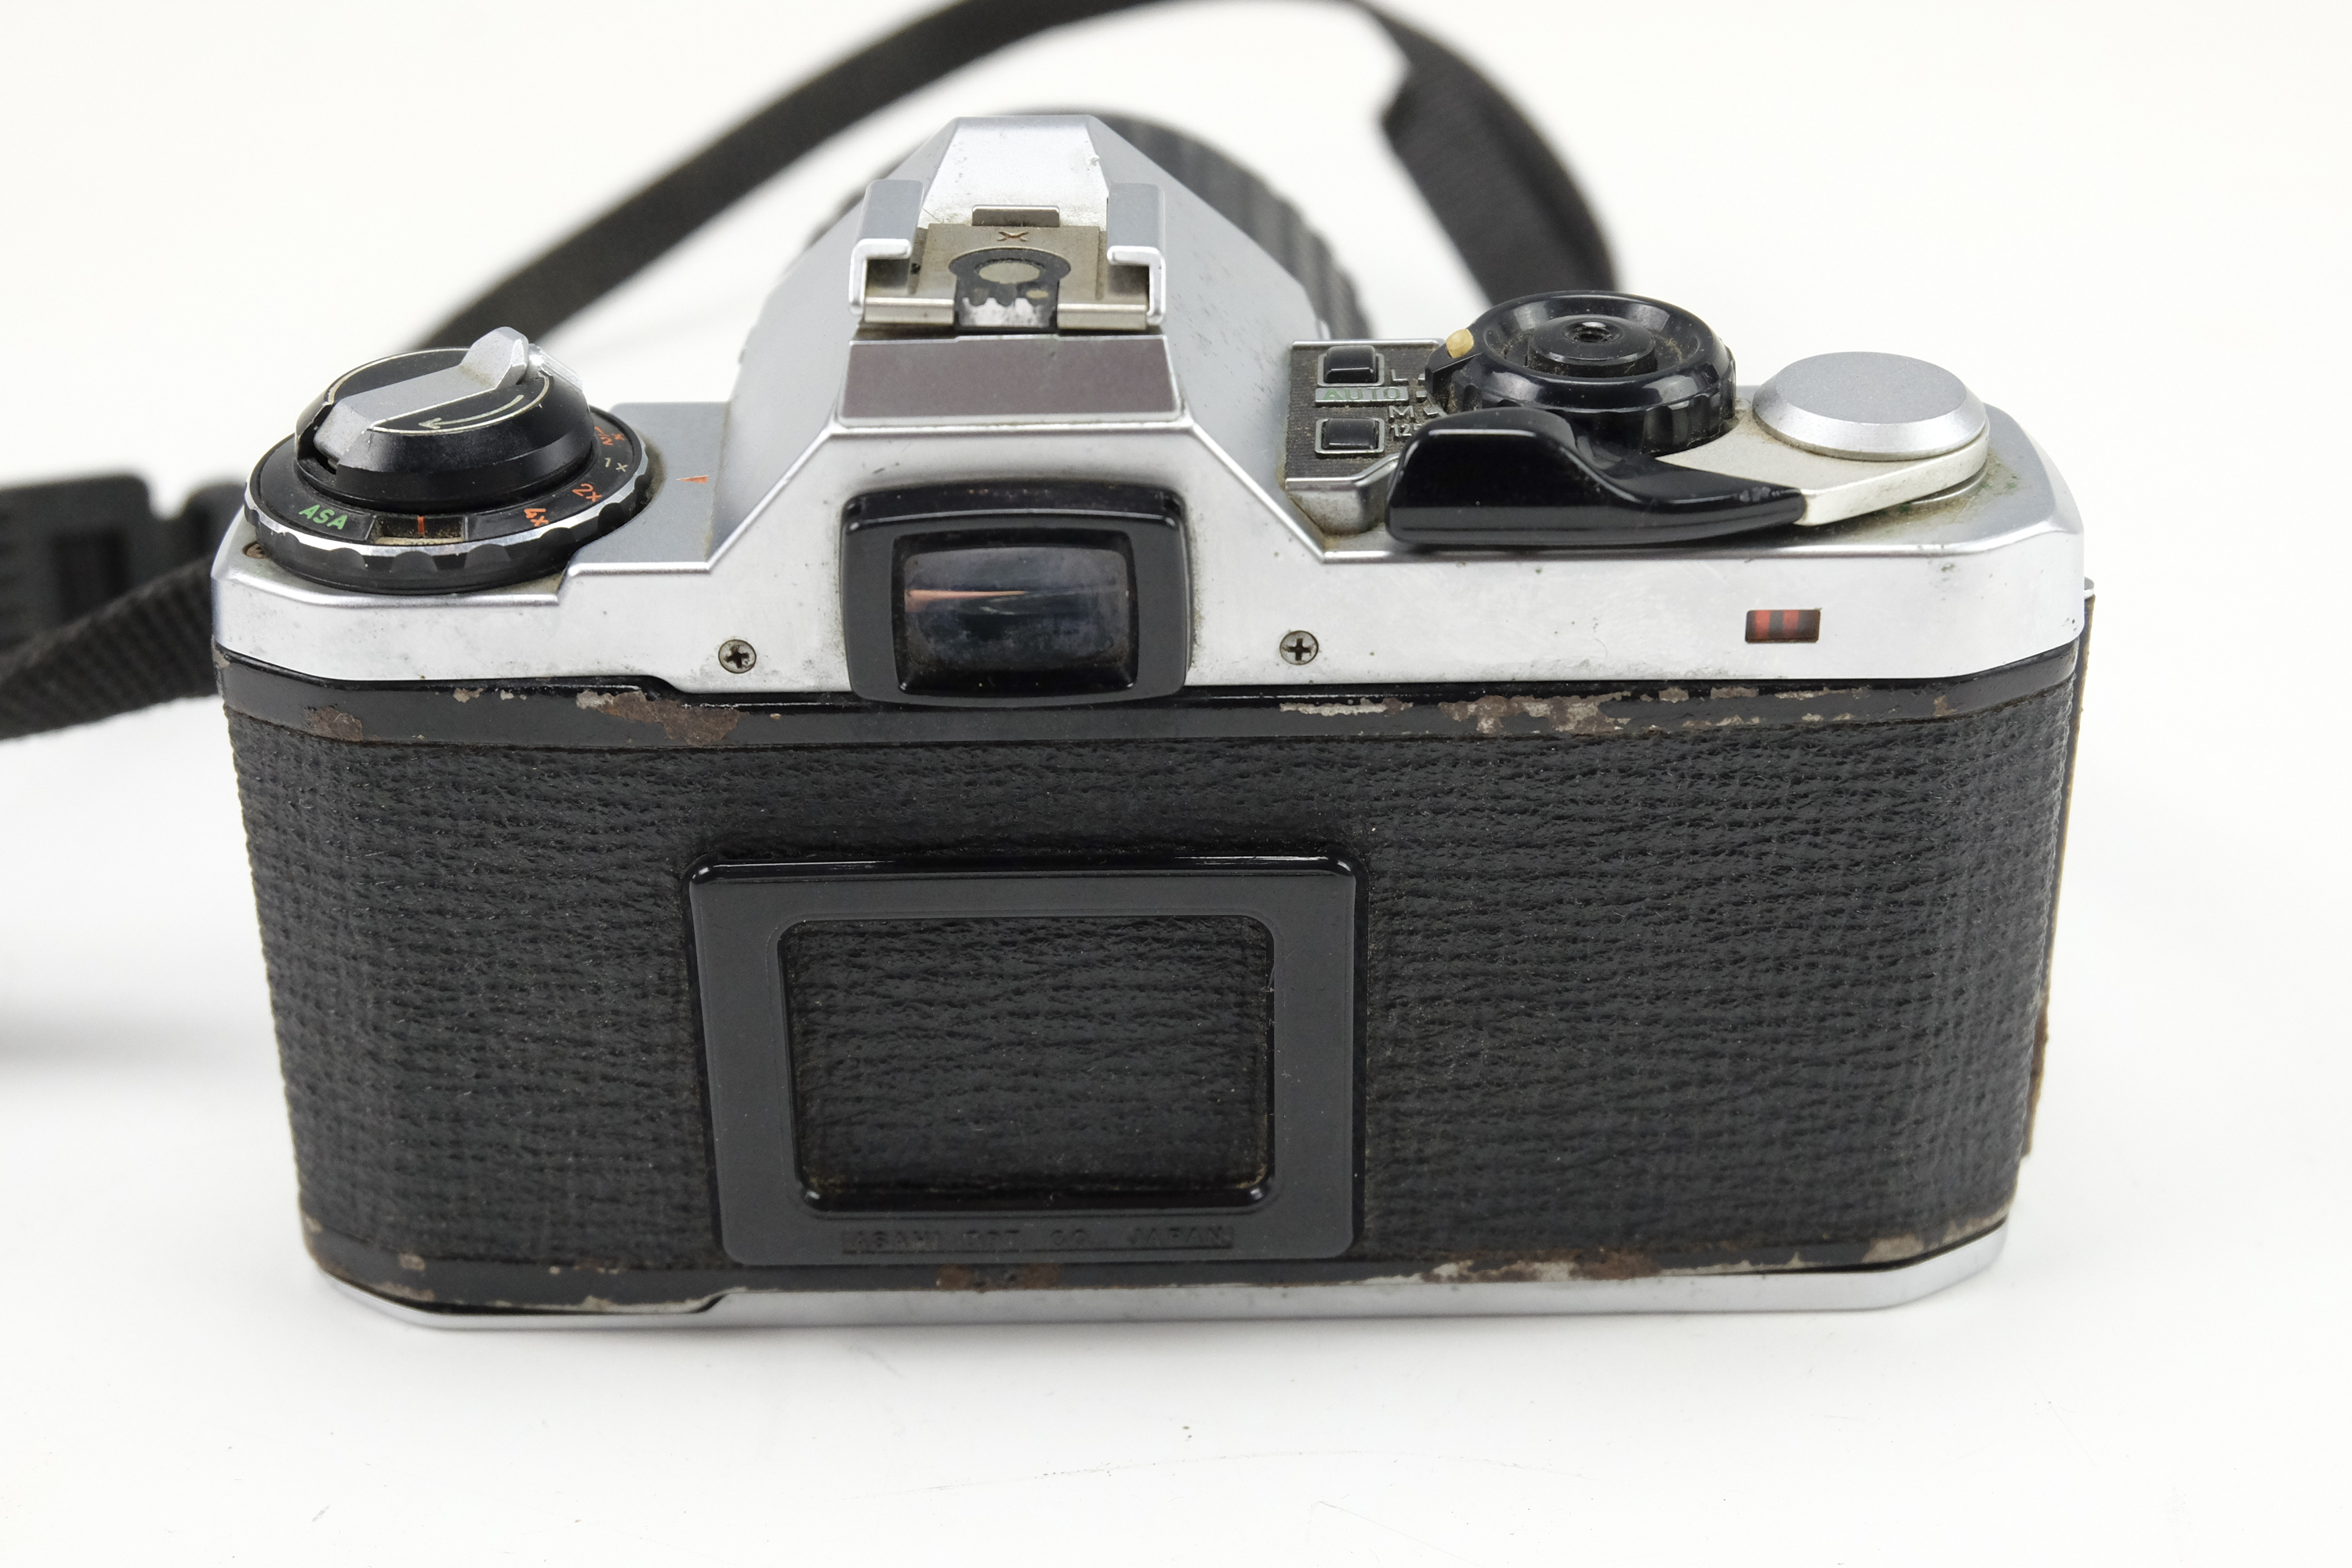 A Pentax K1000 film camera body together with a Pentax MEsuper, two Asahi Optical Co. lenses, a - Image 5 of 7